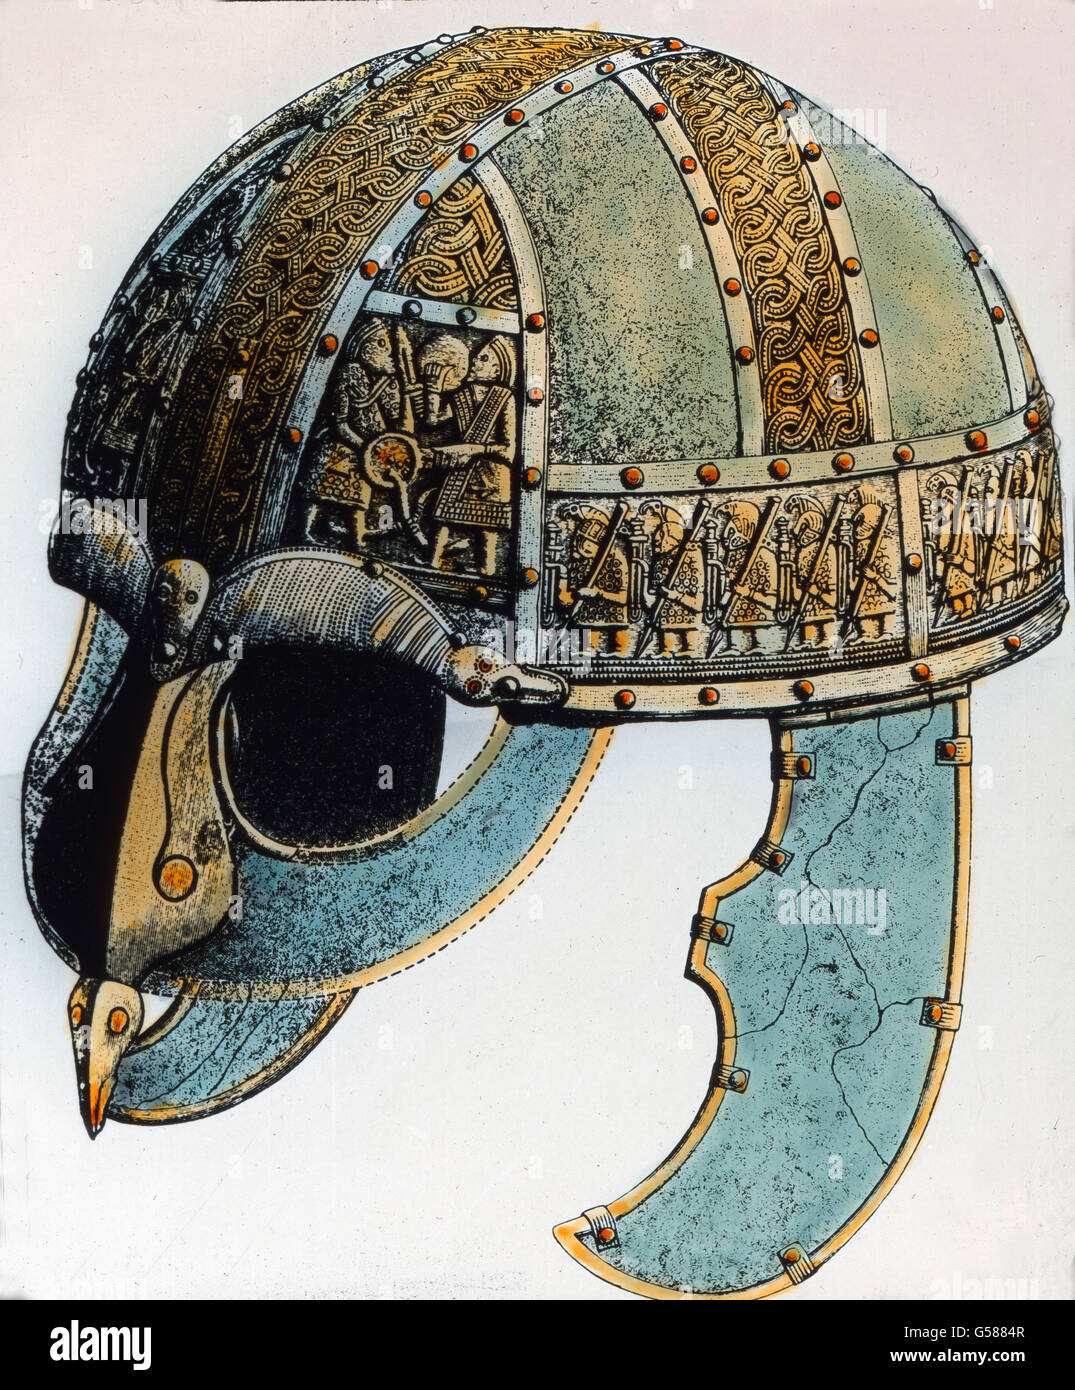 Wikingerhelm, gefunden in der Ortschaft Wendel. Europe, Germany, the Germanic peoples, tribes, 1910s, 1920s, 20th century, archive, Carl Simon, history, historical, Viking, armor, armour, armoured, armored protection, helmet Stock Photo